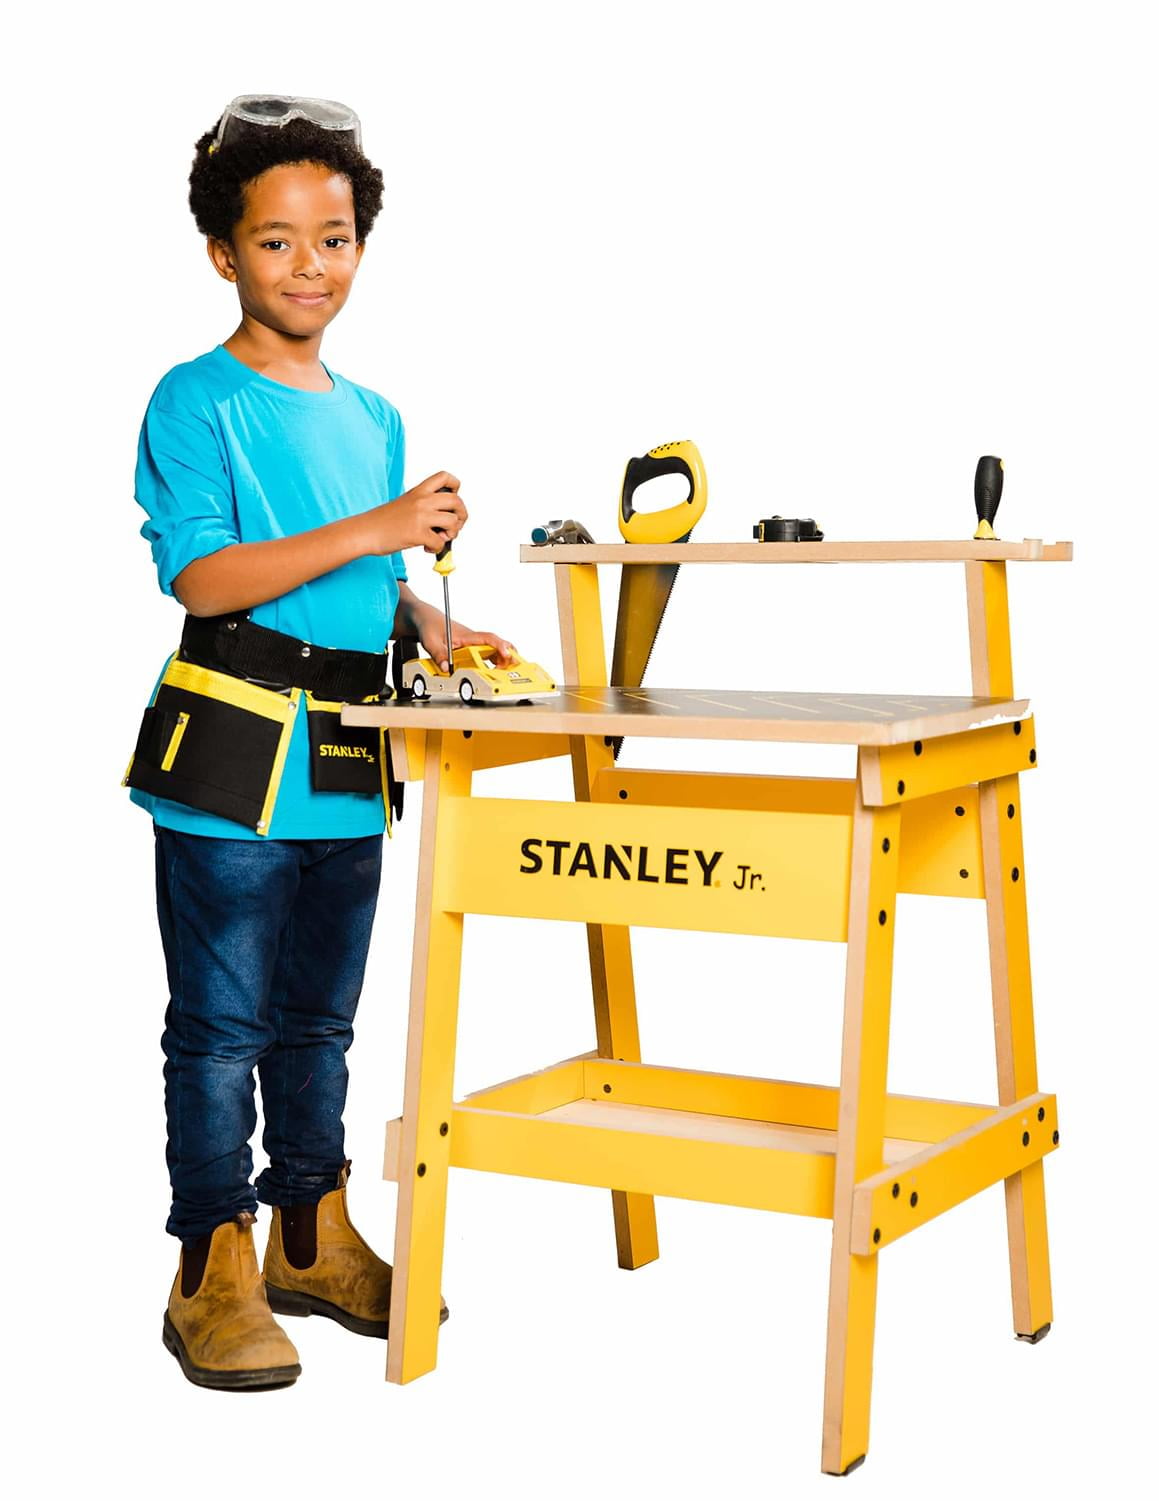 Stanley Jr. Kid's Wooden Work Bench with 10-Piece Belt and Ergonomic Tool  Set for Woodworking and Carpentry for Kids